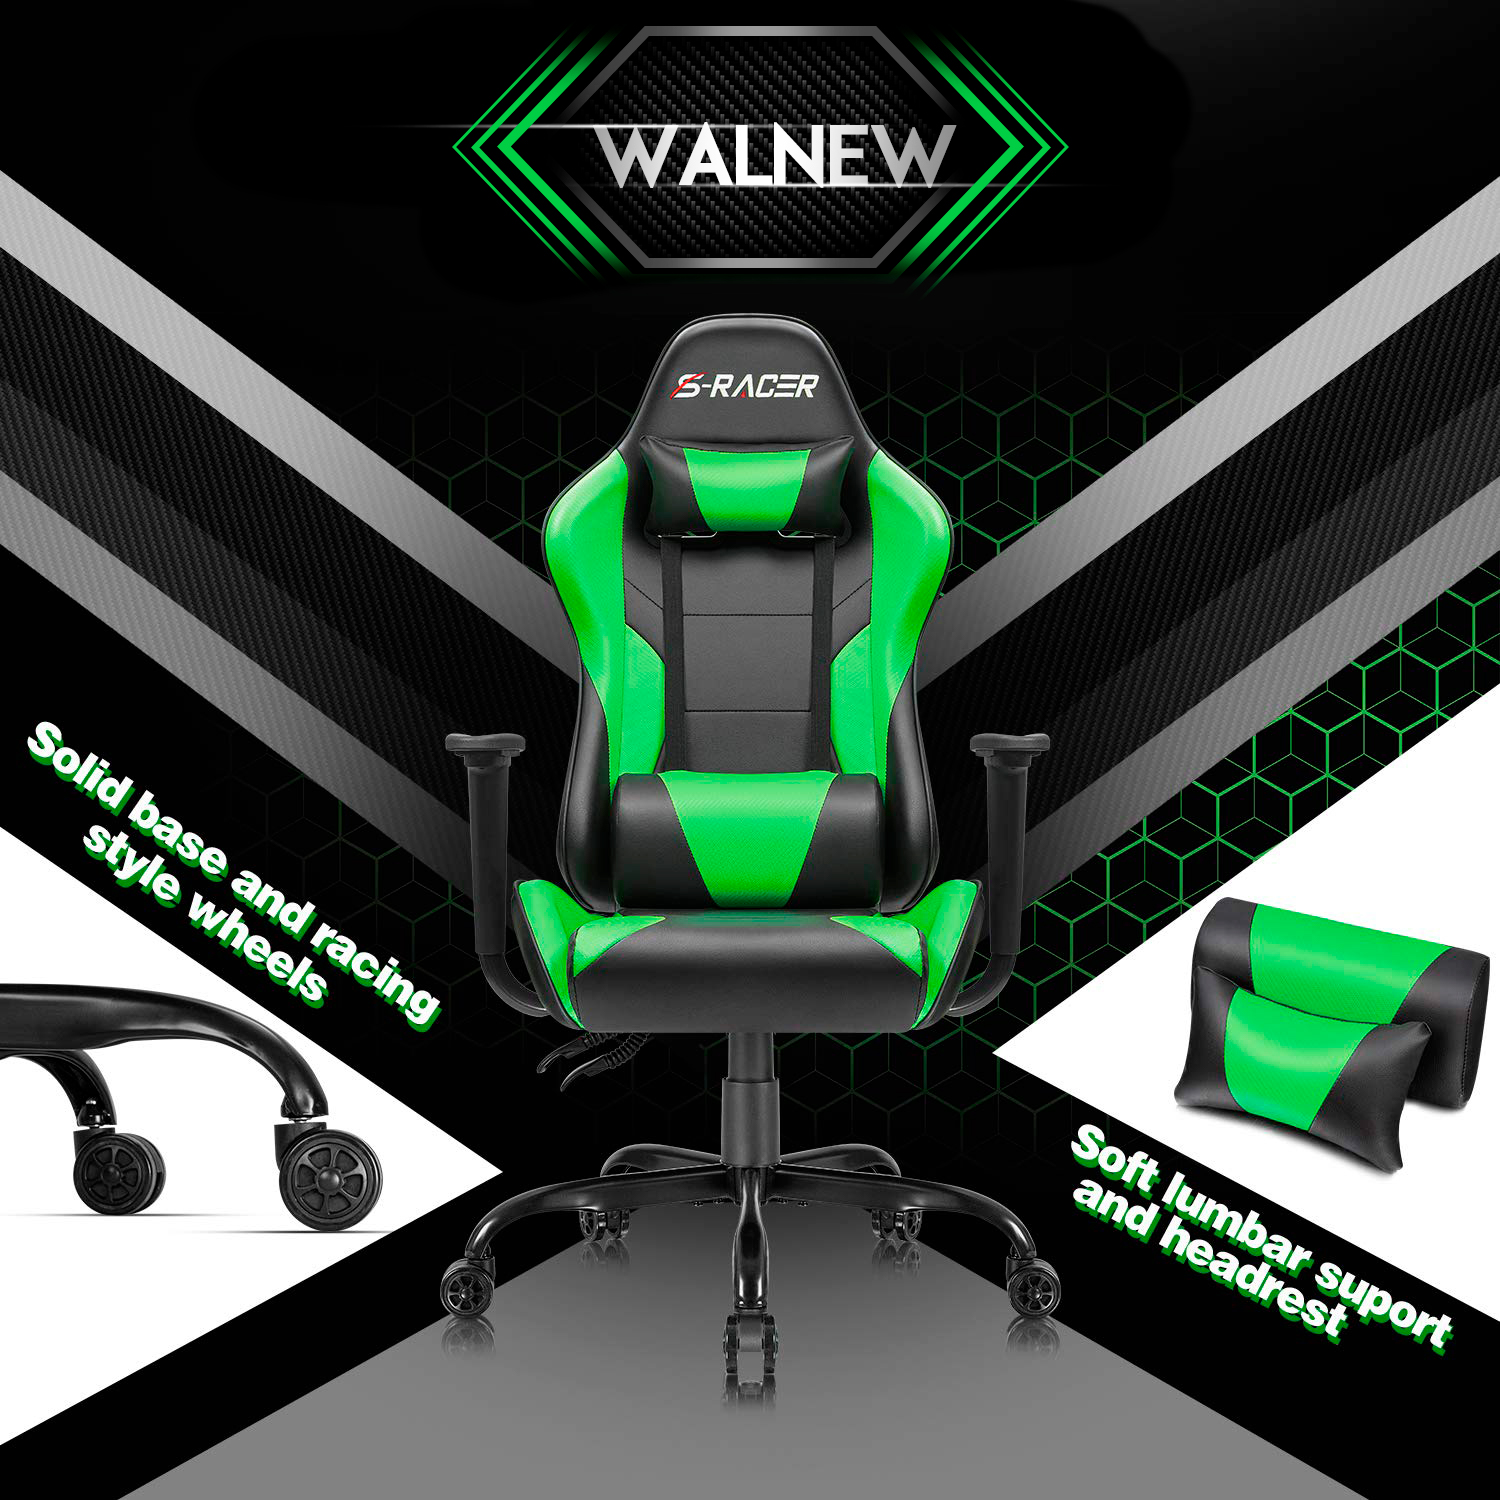 Lacoo Gaming Chair PU Leather Reclining Racing Style Ergonomic Office Chair with Headrest and Lumbar Support, Green - image 5 of 7